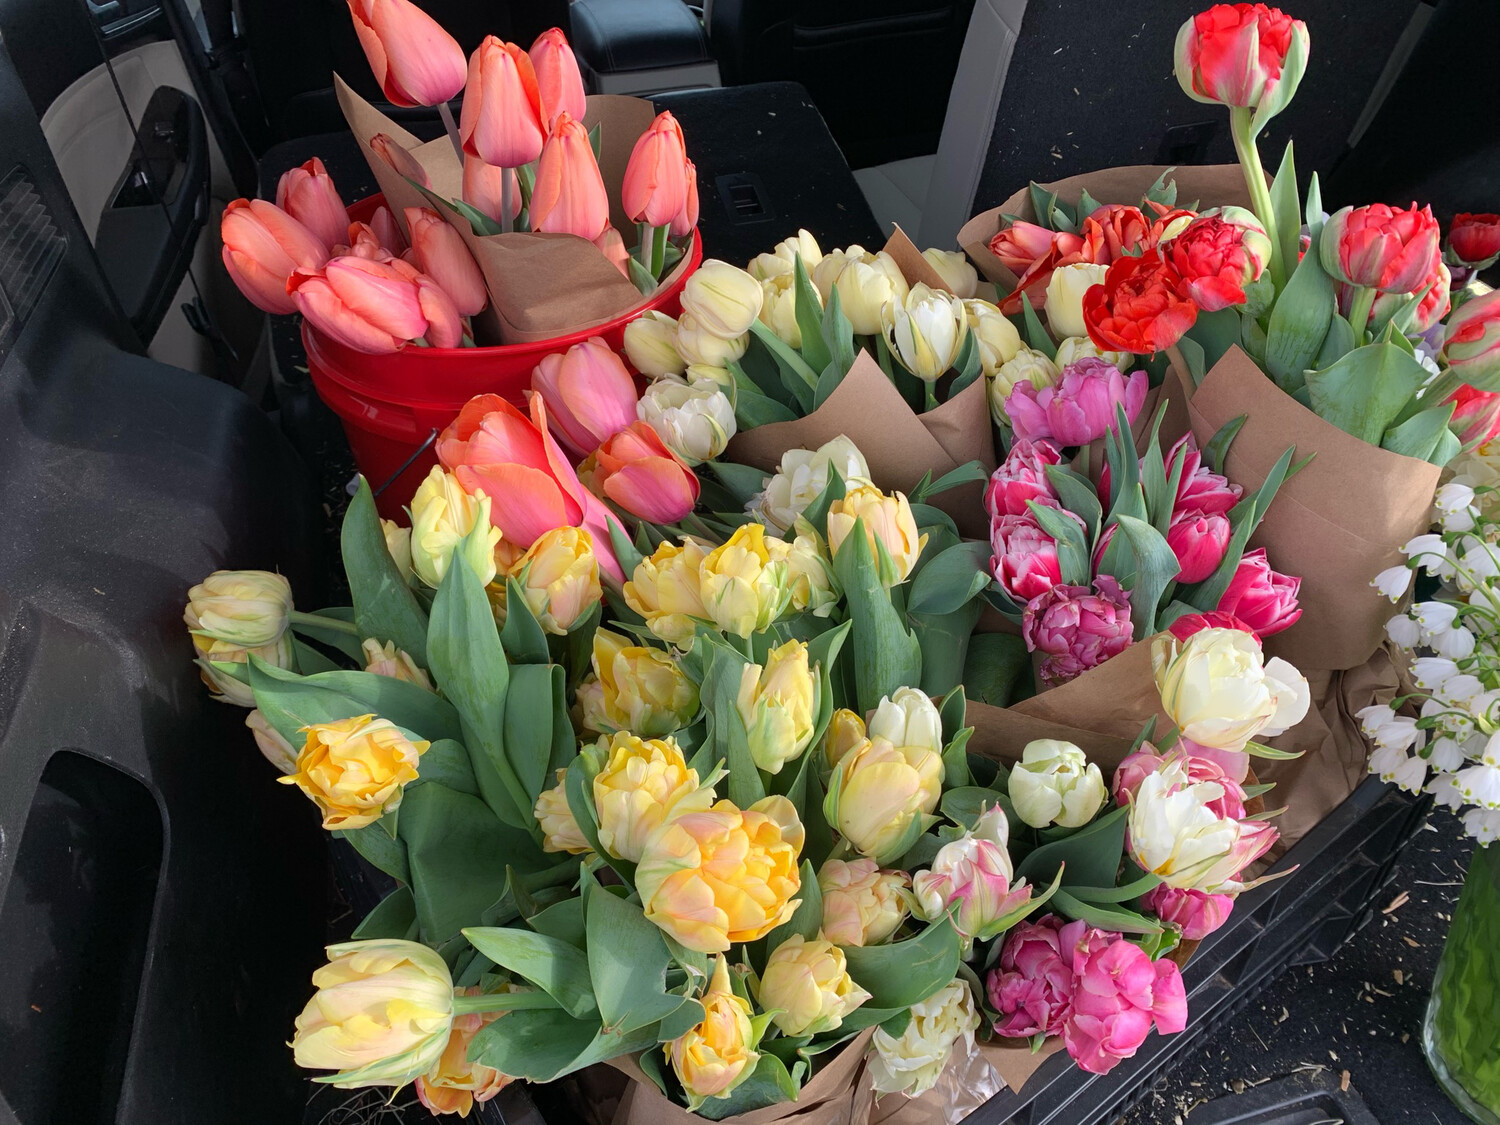 Buy One Tulip Bouquet For $28.95, Get One For $15!